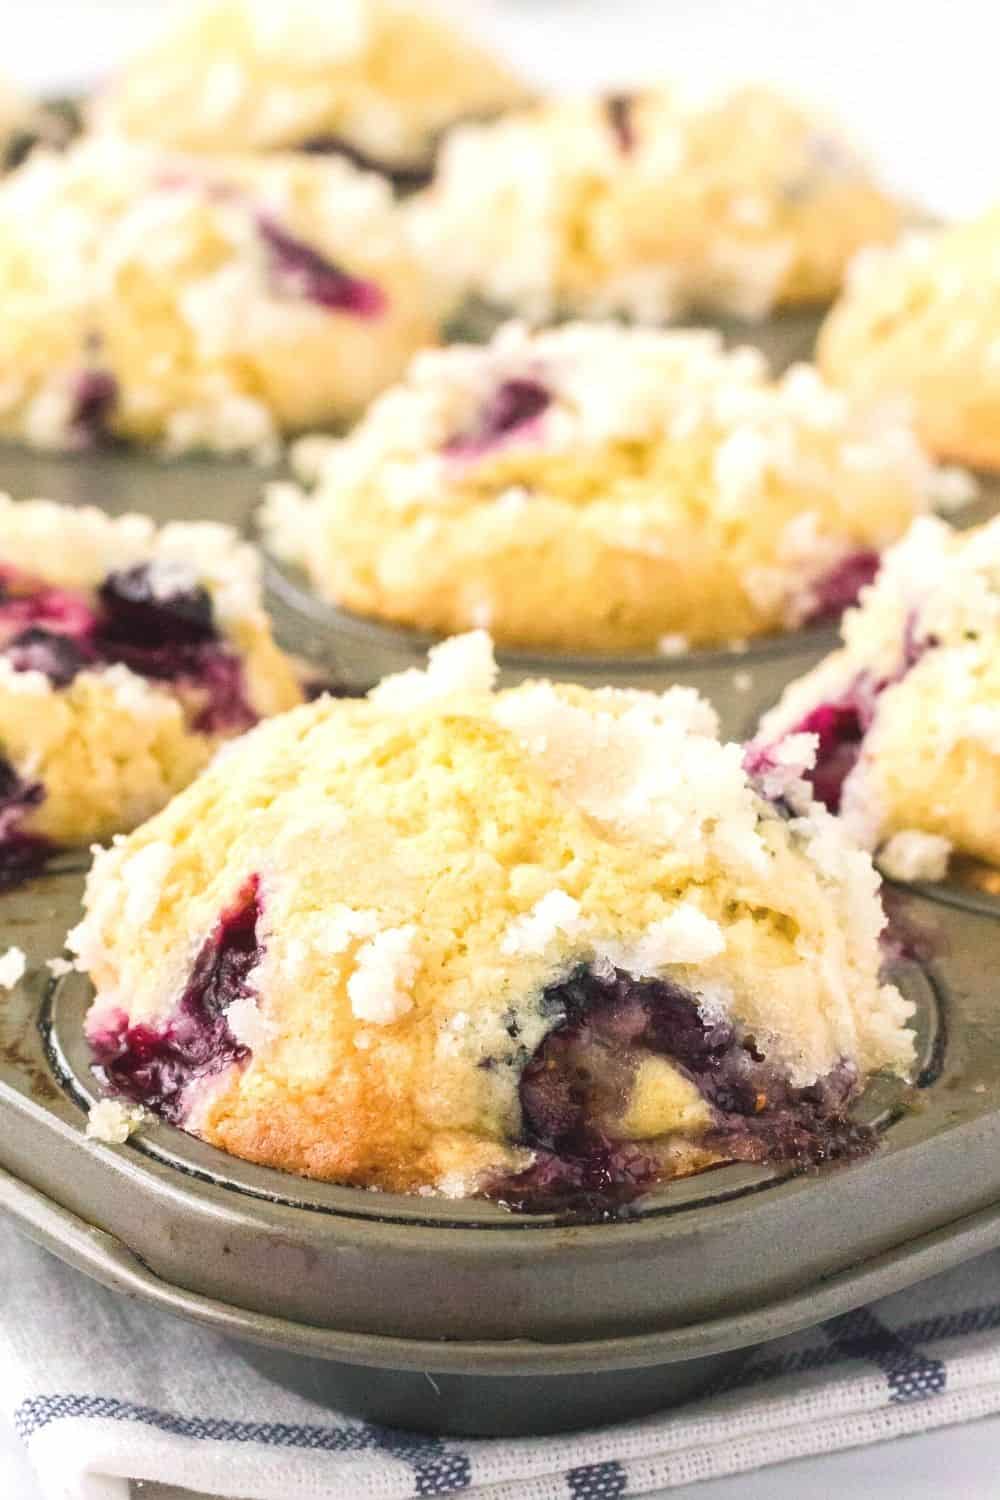 freshly baked blueberry muffins with streusel topping, still in the muffin pan